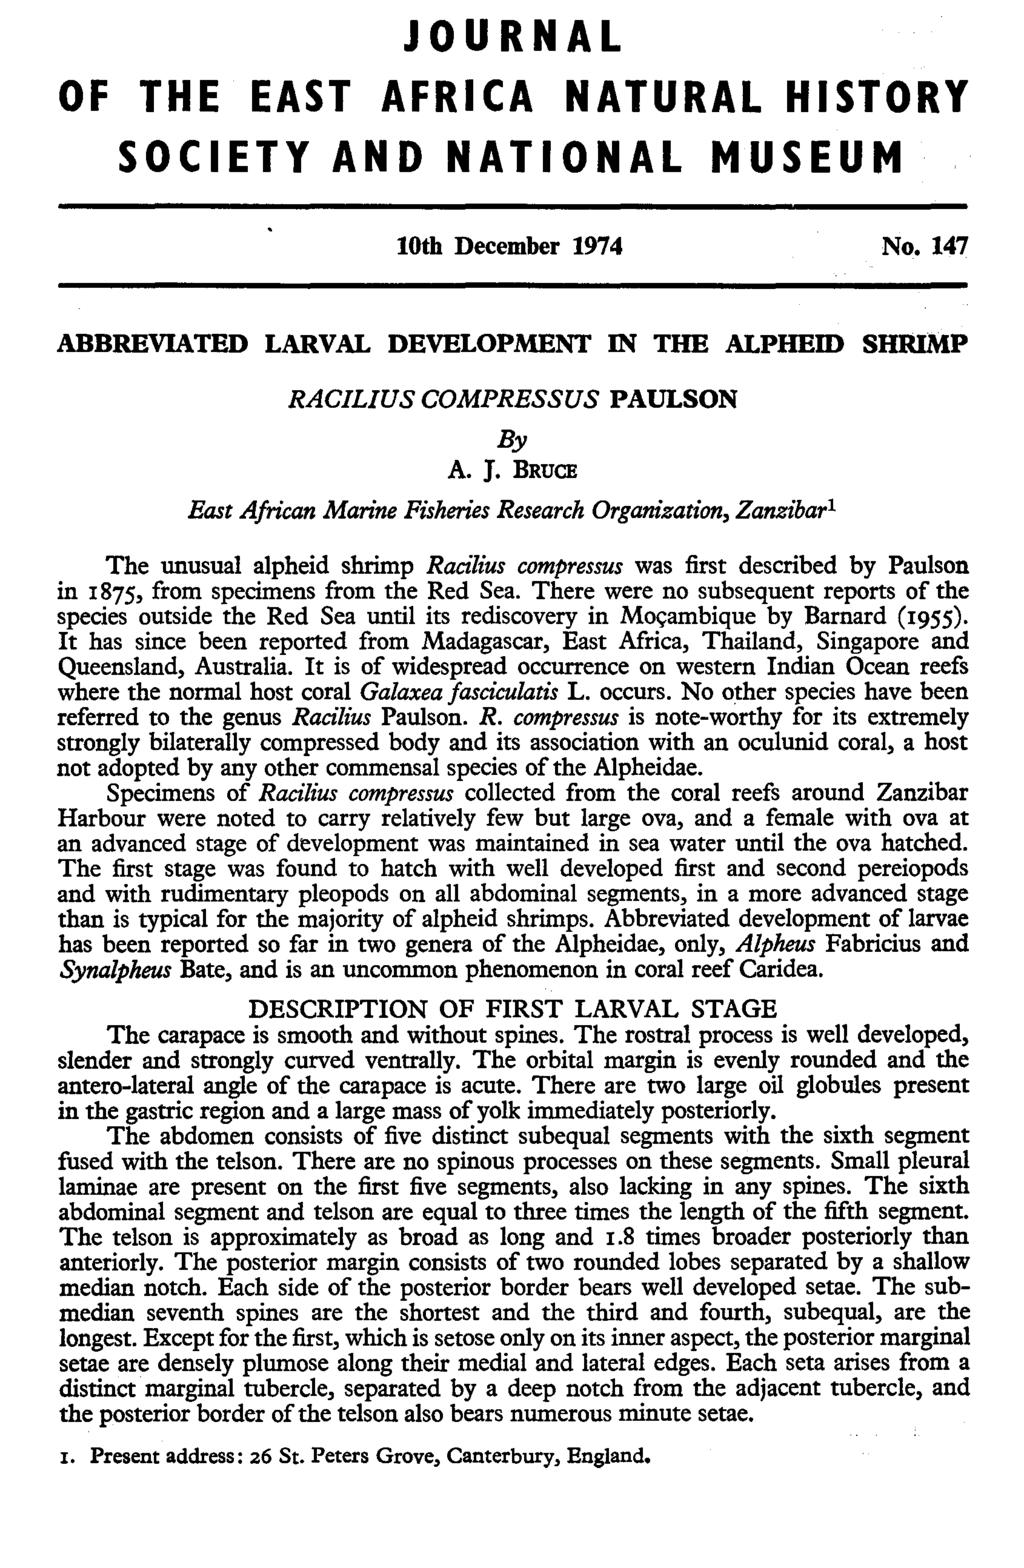 JOURNAL OF THE EAST AFRICA NATURAL HISTORY SOCIETY AND NATIONAL MUSEUM 10th December 1974 No. 147 ABBREVIATED LARVAL DEVELOPMENT IN THE ALPHEID SHlUMP RACILIUS COMPRESS US PAULSON By A. J.